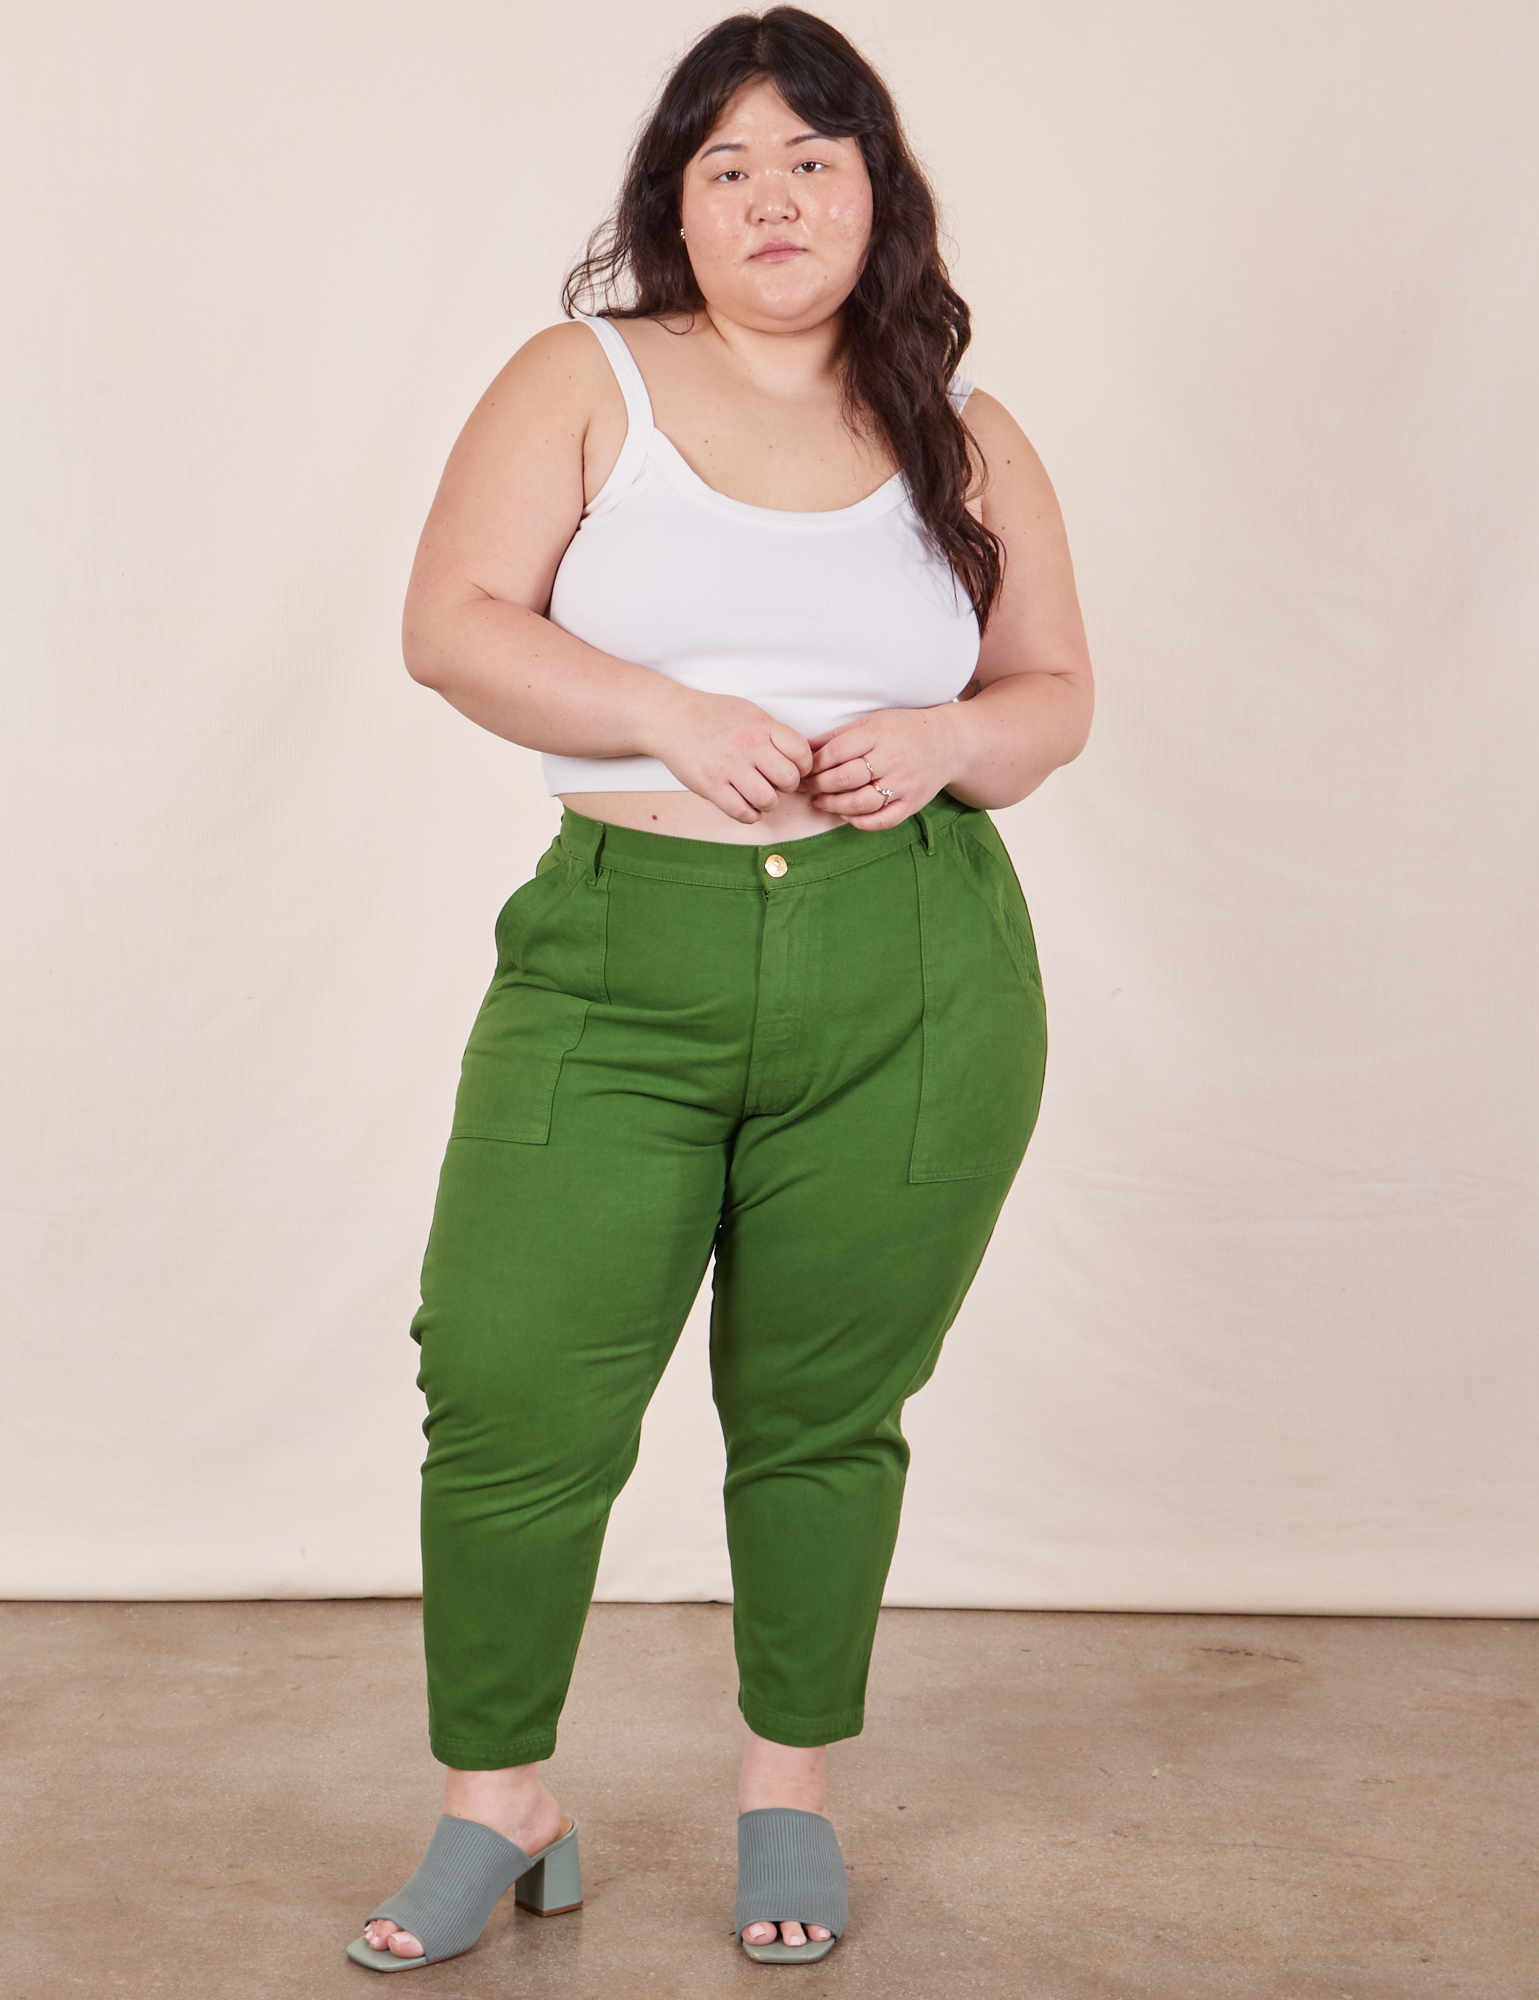 Ashley is 5&#39;7&quot; and wearing 1XL Petite Pencil Pants in Lawn Green paired with Cropped Cami in vintage tee off-white